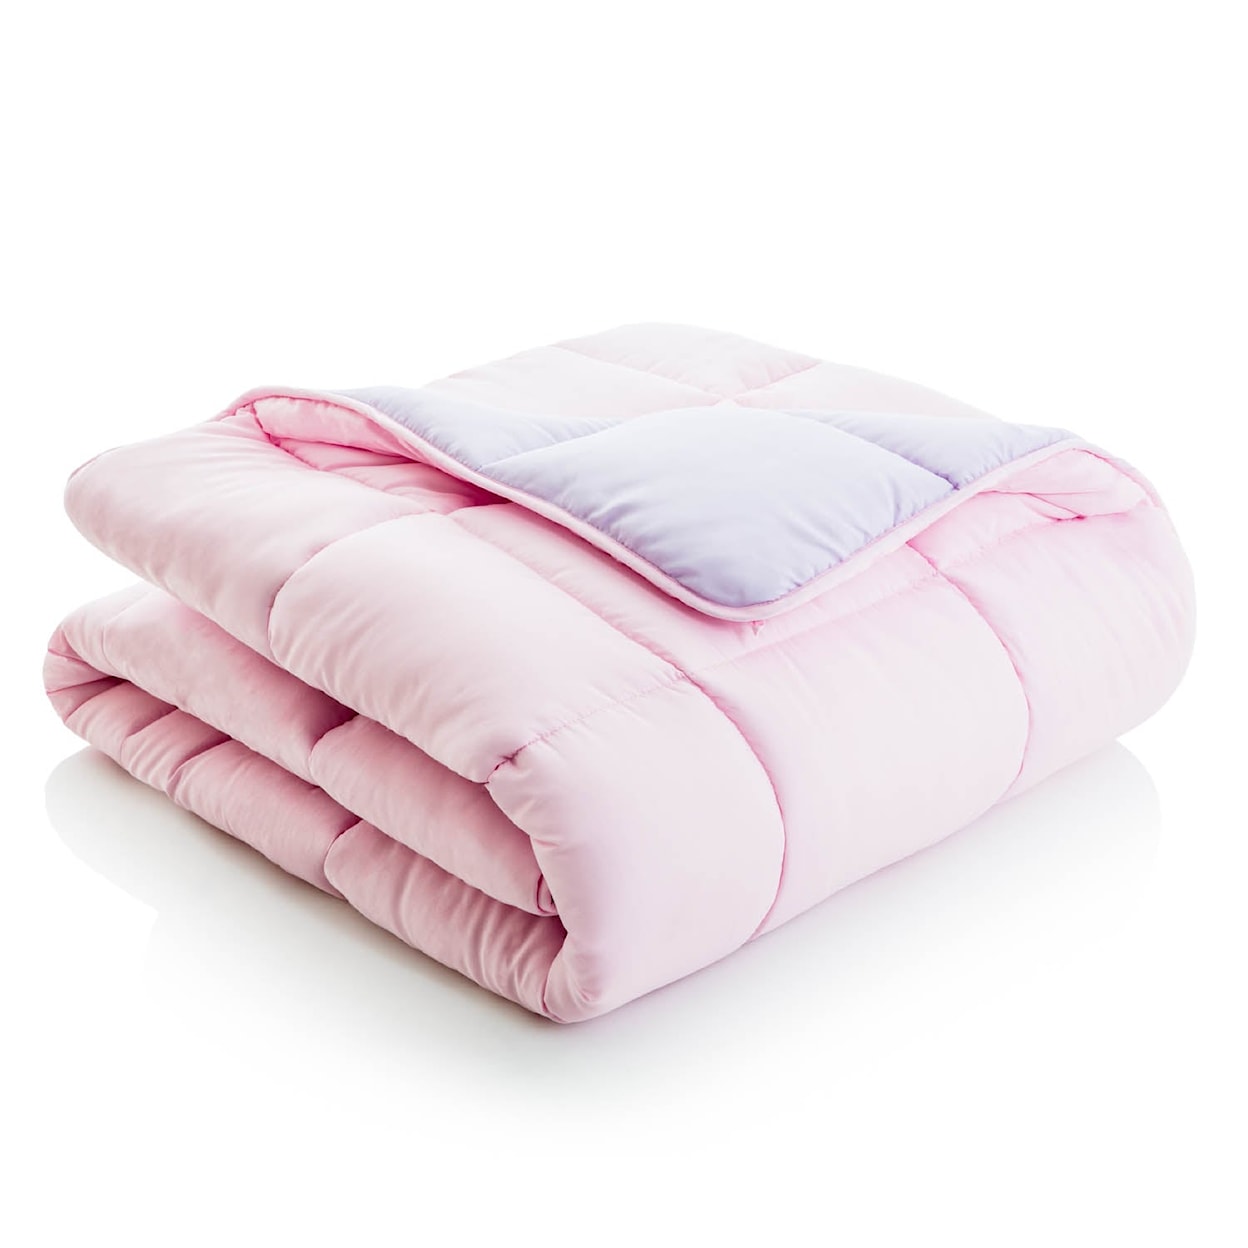 Malouf Reversible Bed in a Bag K Lilac Reversible Bed in a Bag